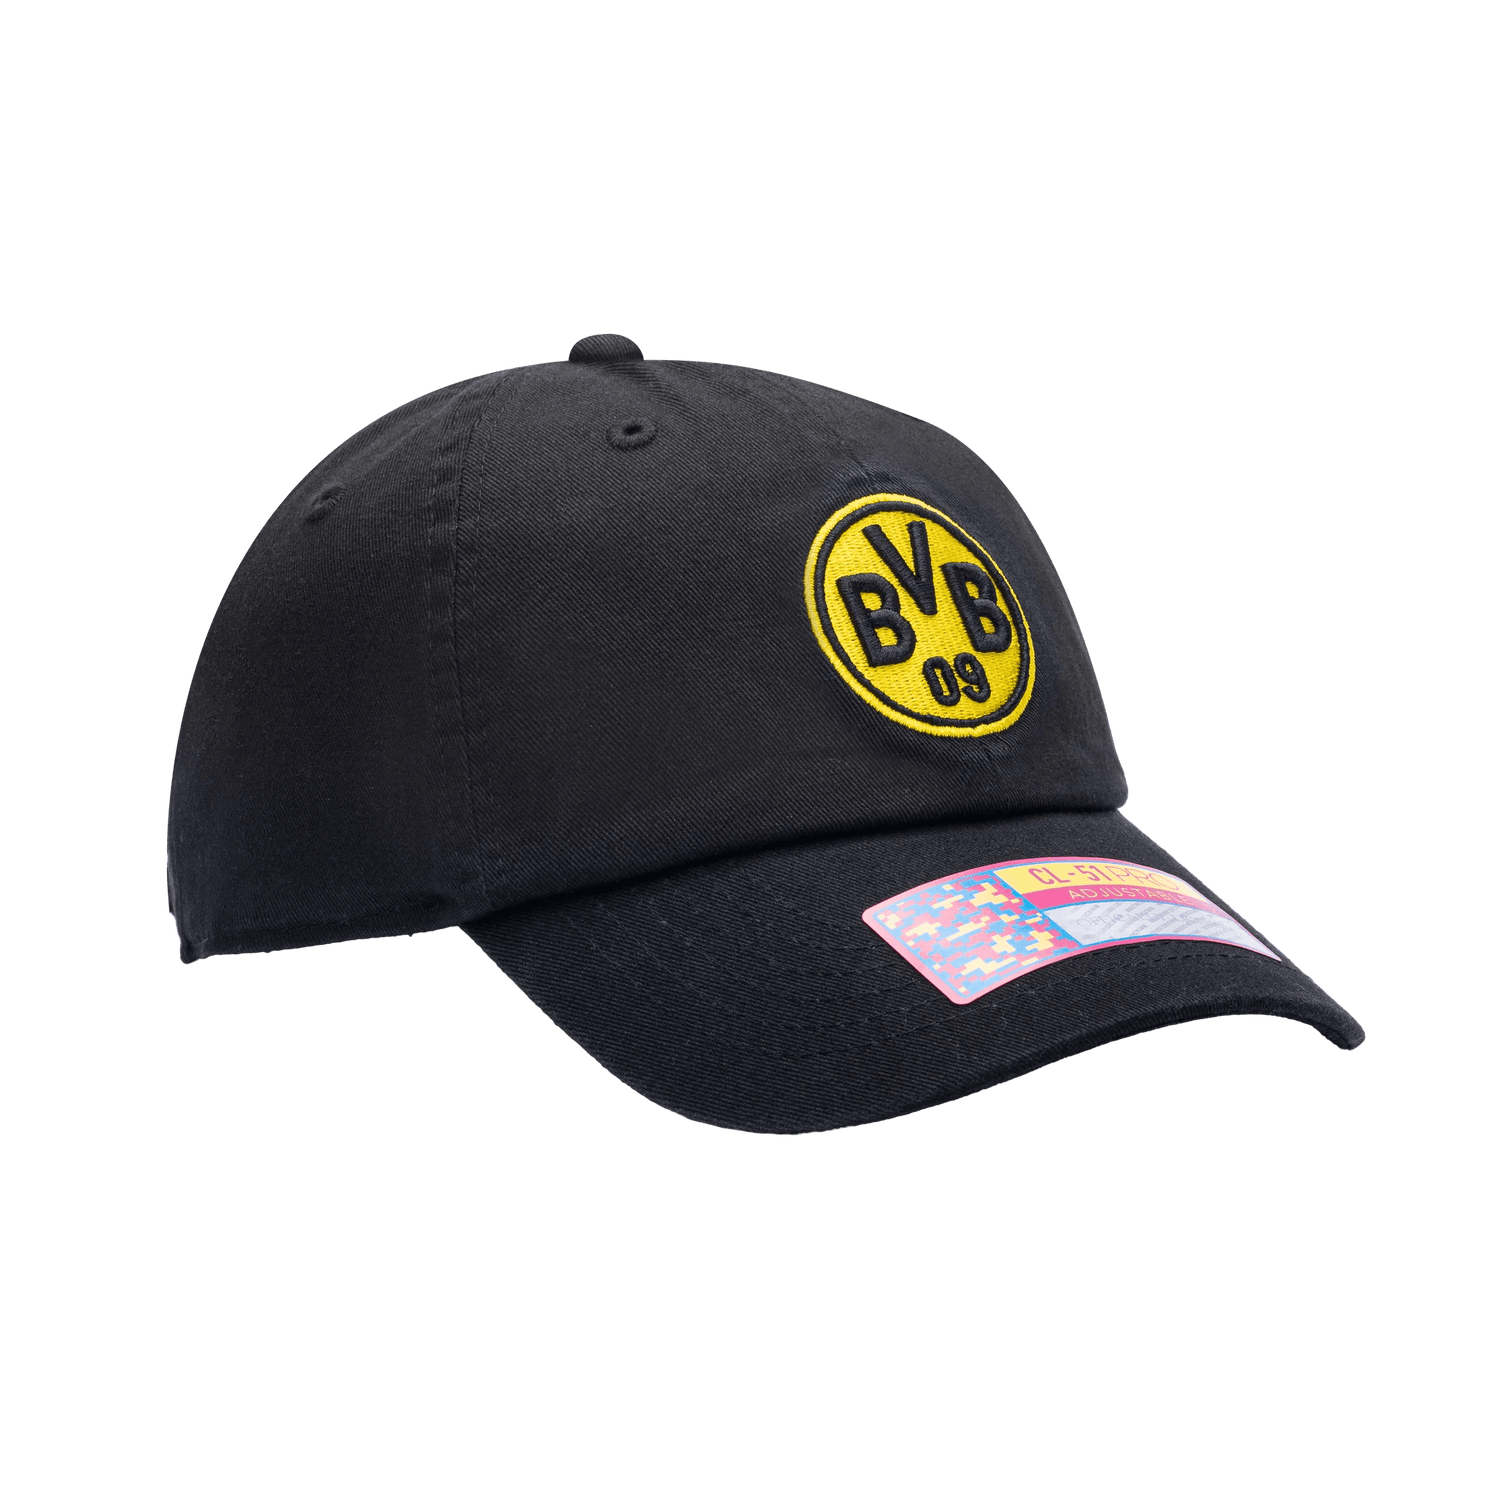 FI Collection Club Borussia Dortmund Bambo Classic Hat (Lateral - Side 2)